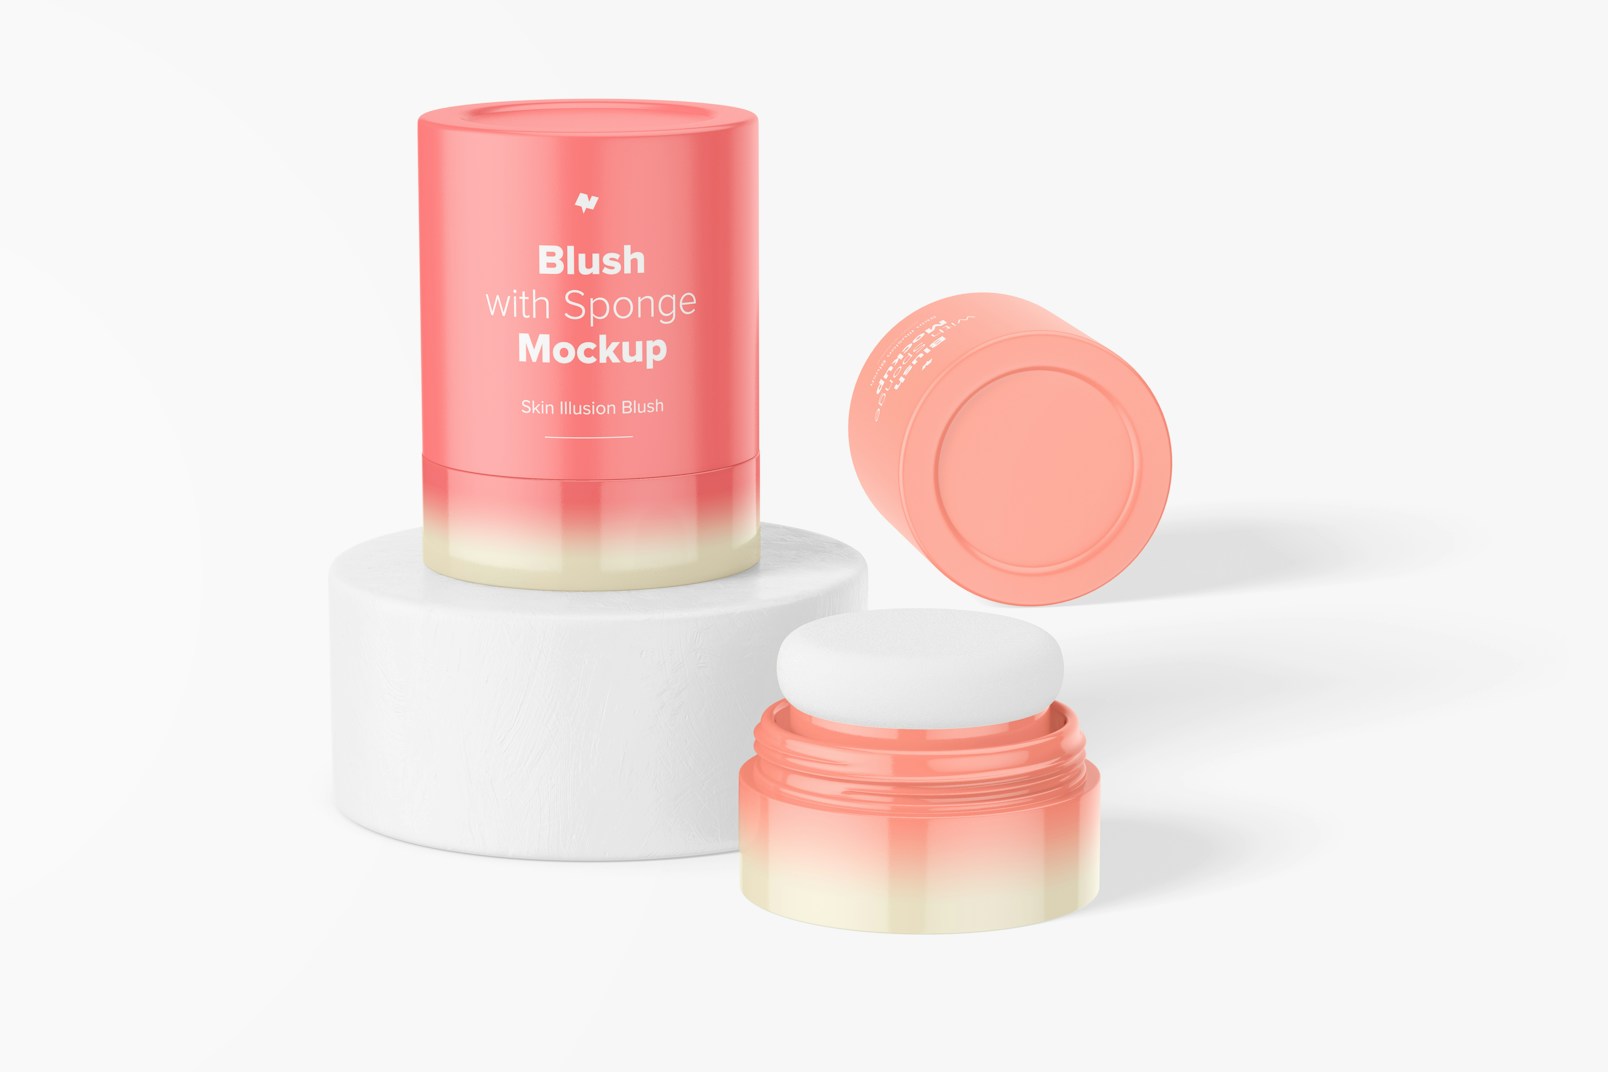 Blushes with Sponge Mockup, Opened and Closed